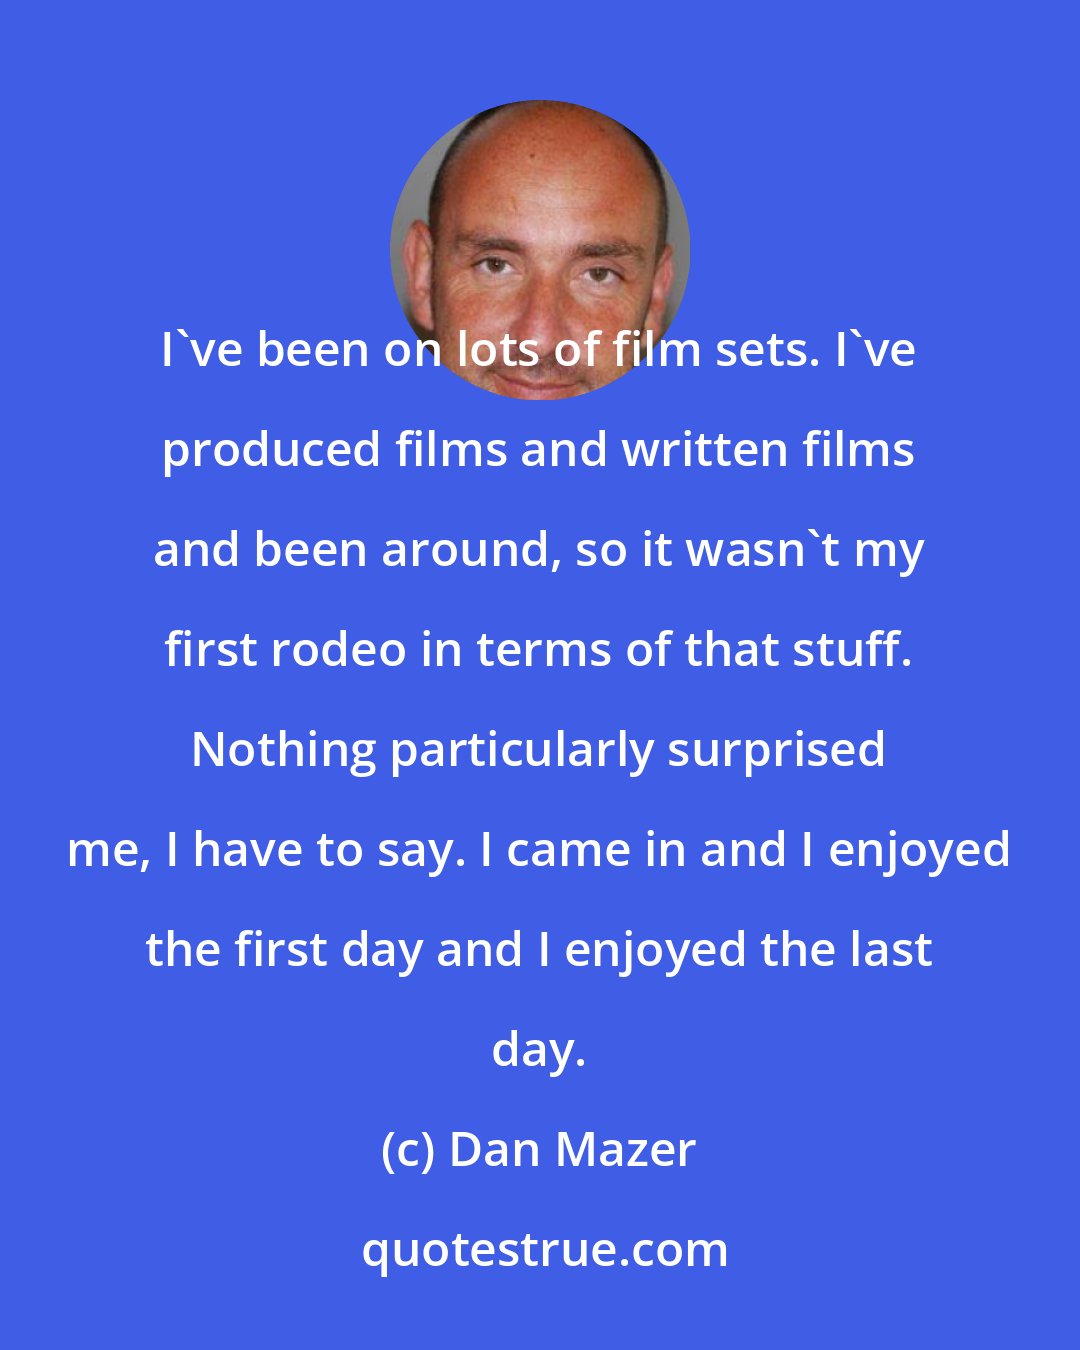 Dan Mazer: I've been on lots of film sets. I've produced films and written films and been around, so it wasn't my first rodeo in terms of that stuff. Nothing particularly surprised me, I have to say. I came in and I enjoyed the first day and I enjoyed the last day.